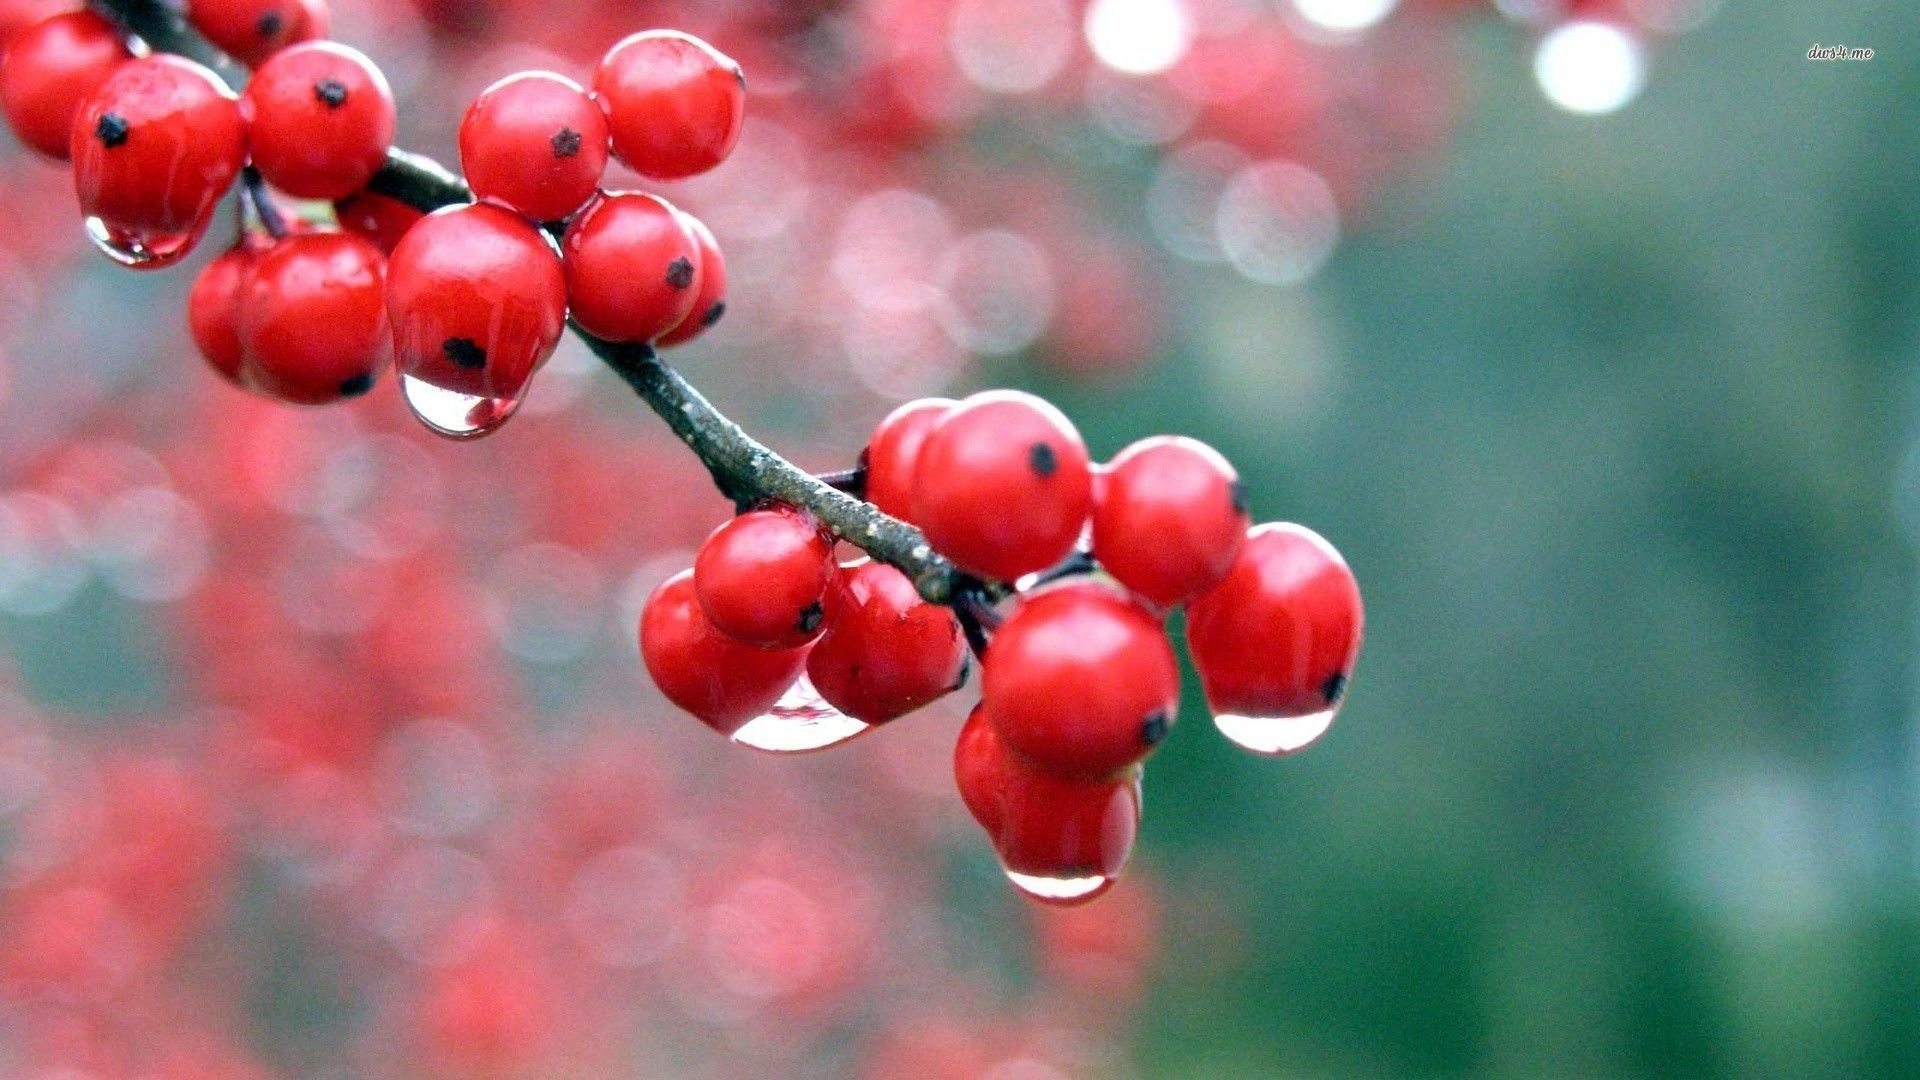 Raining on redcurrant wallpaper - Artistic wallpapers - #5577